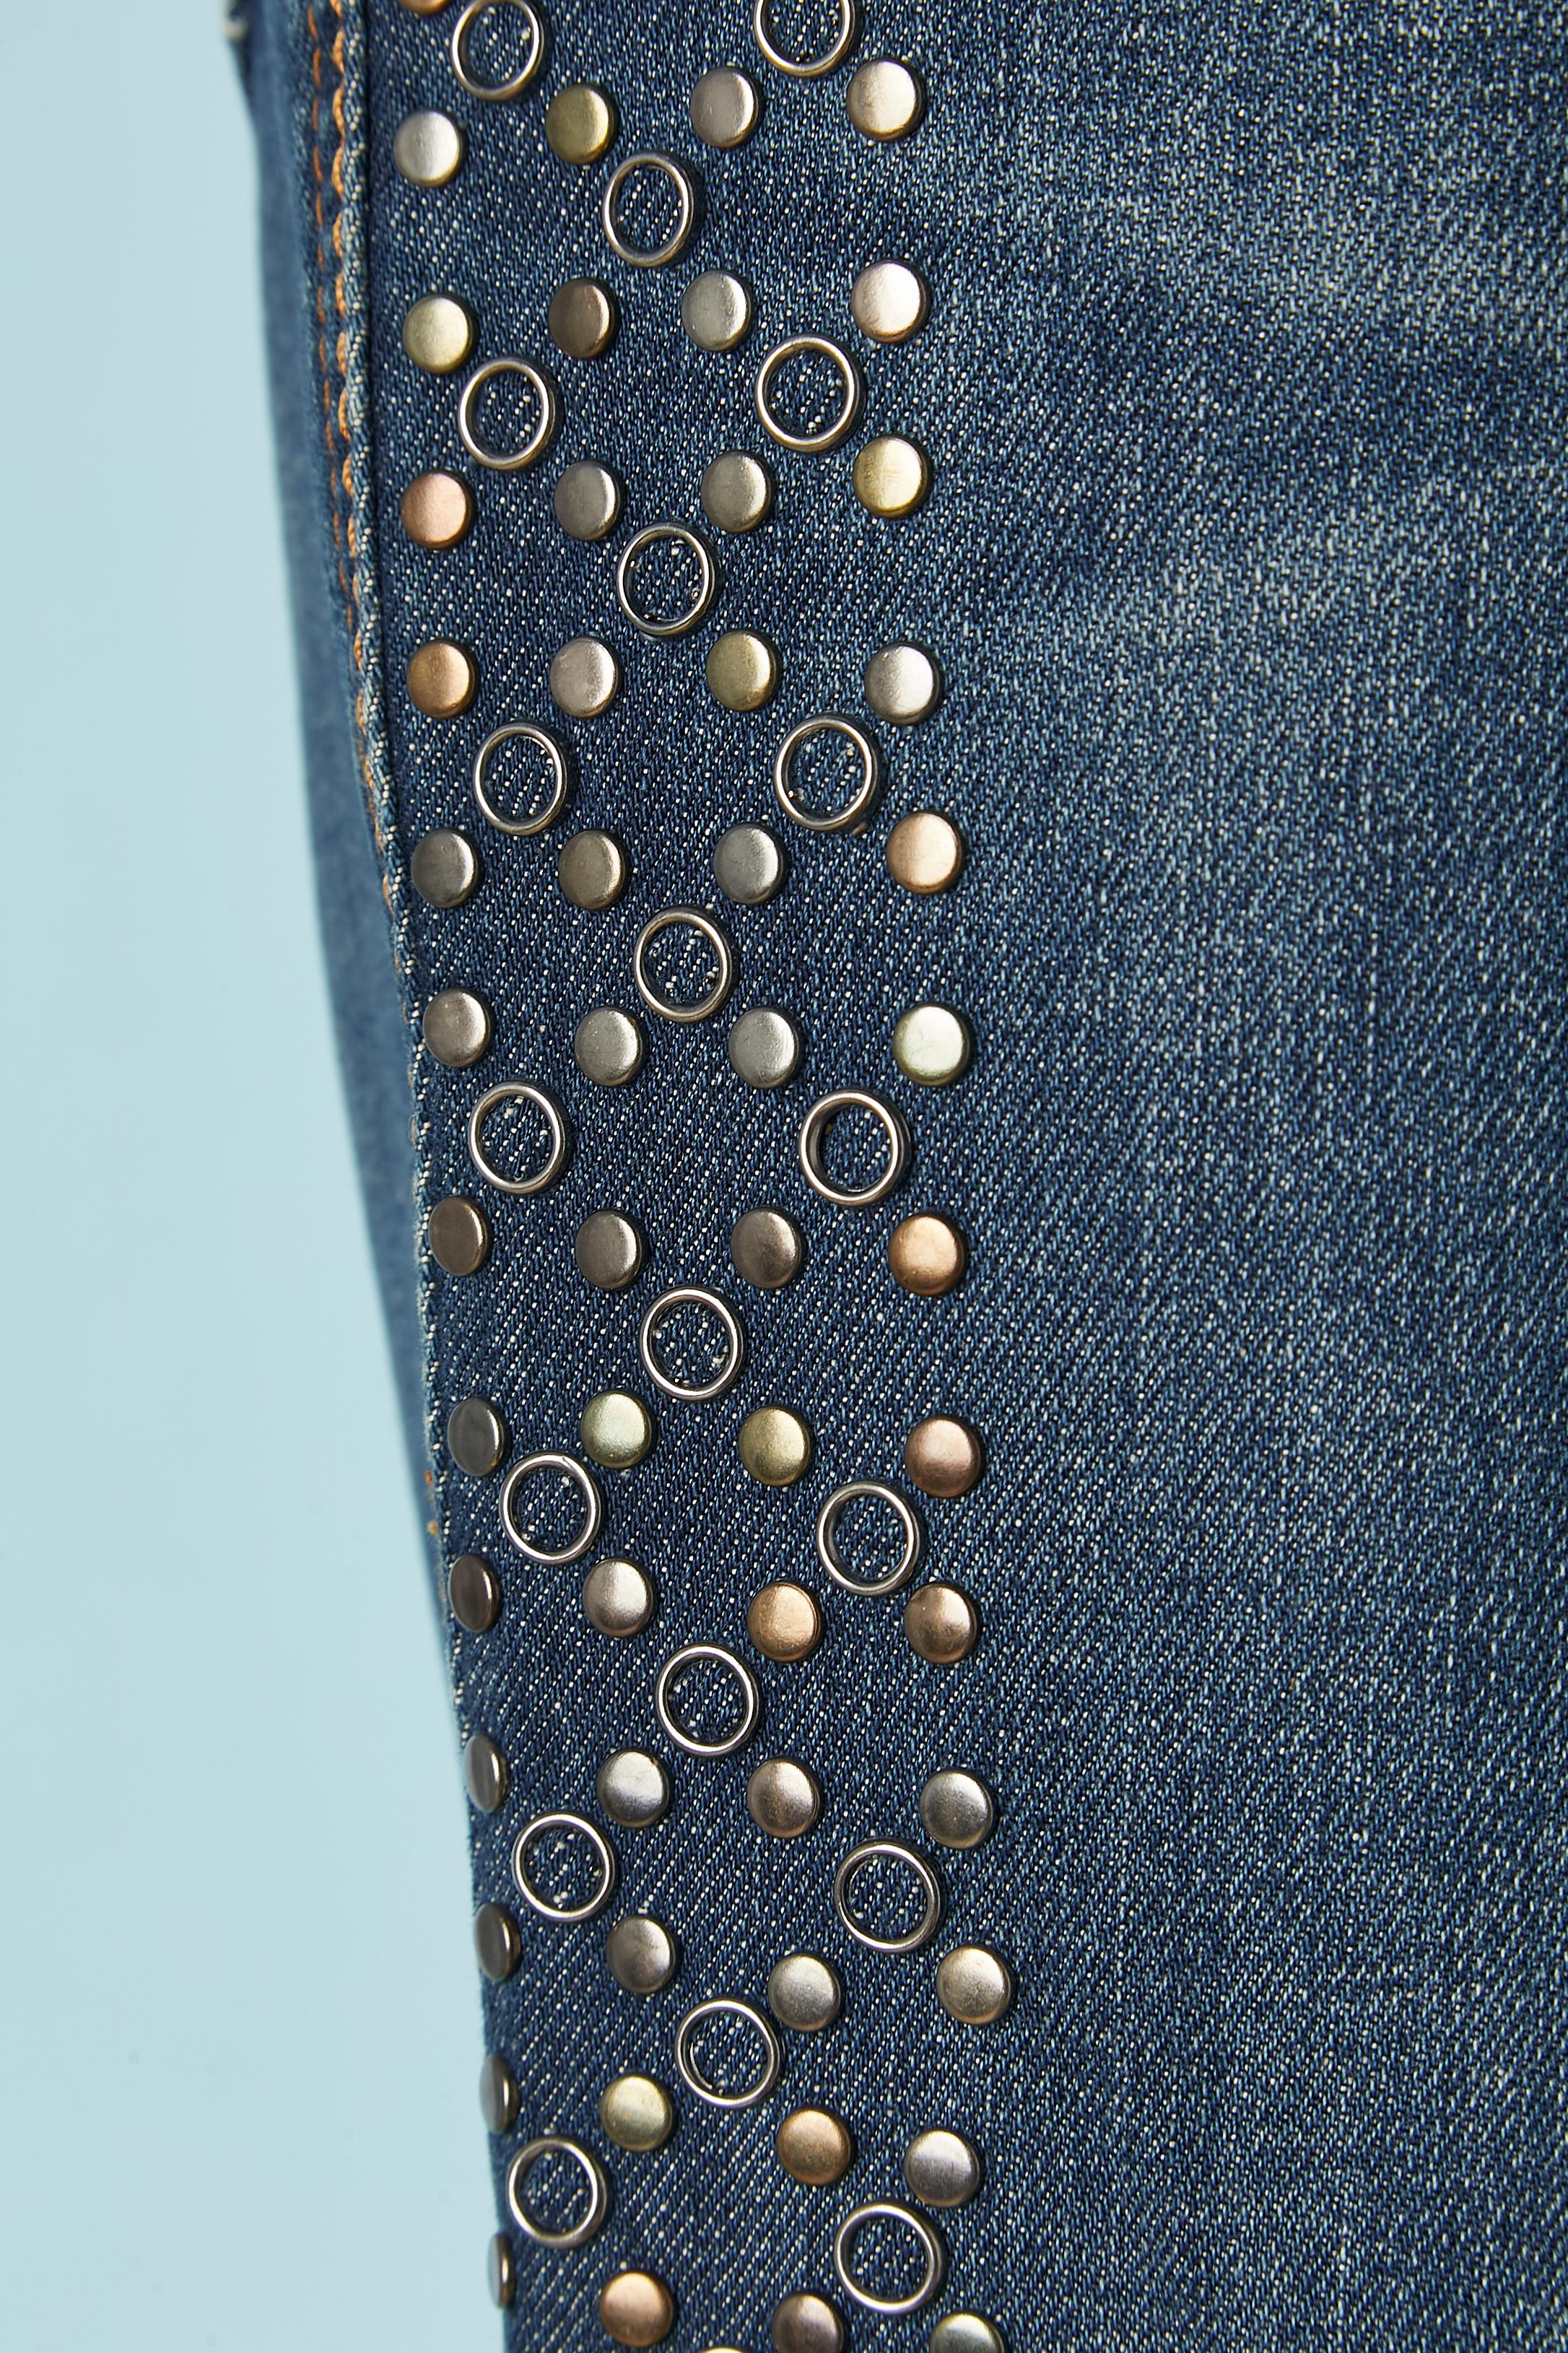 Blue denim jeans with metallic studs and eyelet on the side Roberto Cavalli Men  In Excellent Condition For Sale In Saint-Ouen-Sur-Seine, FR